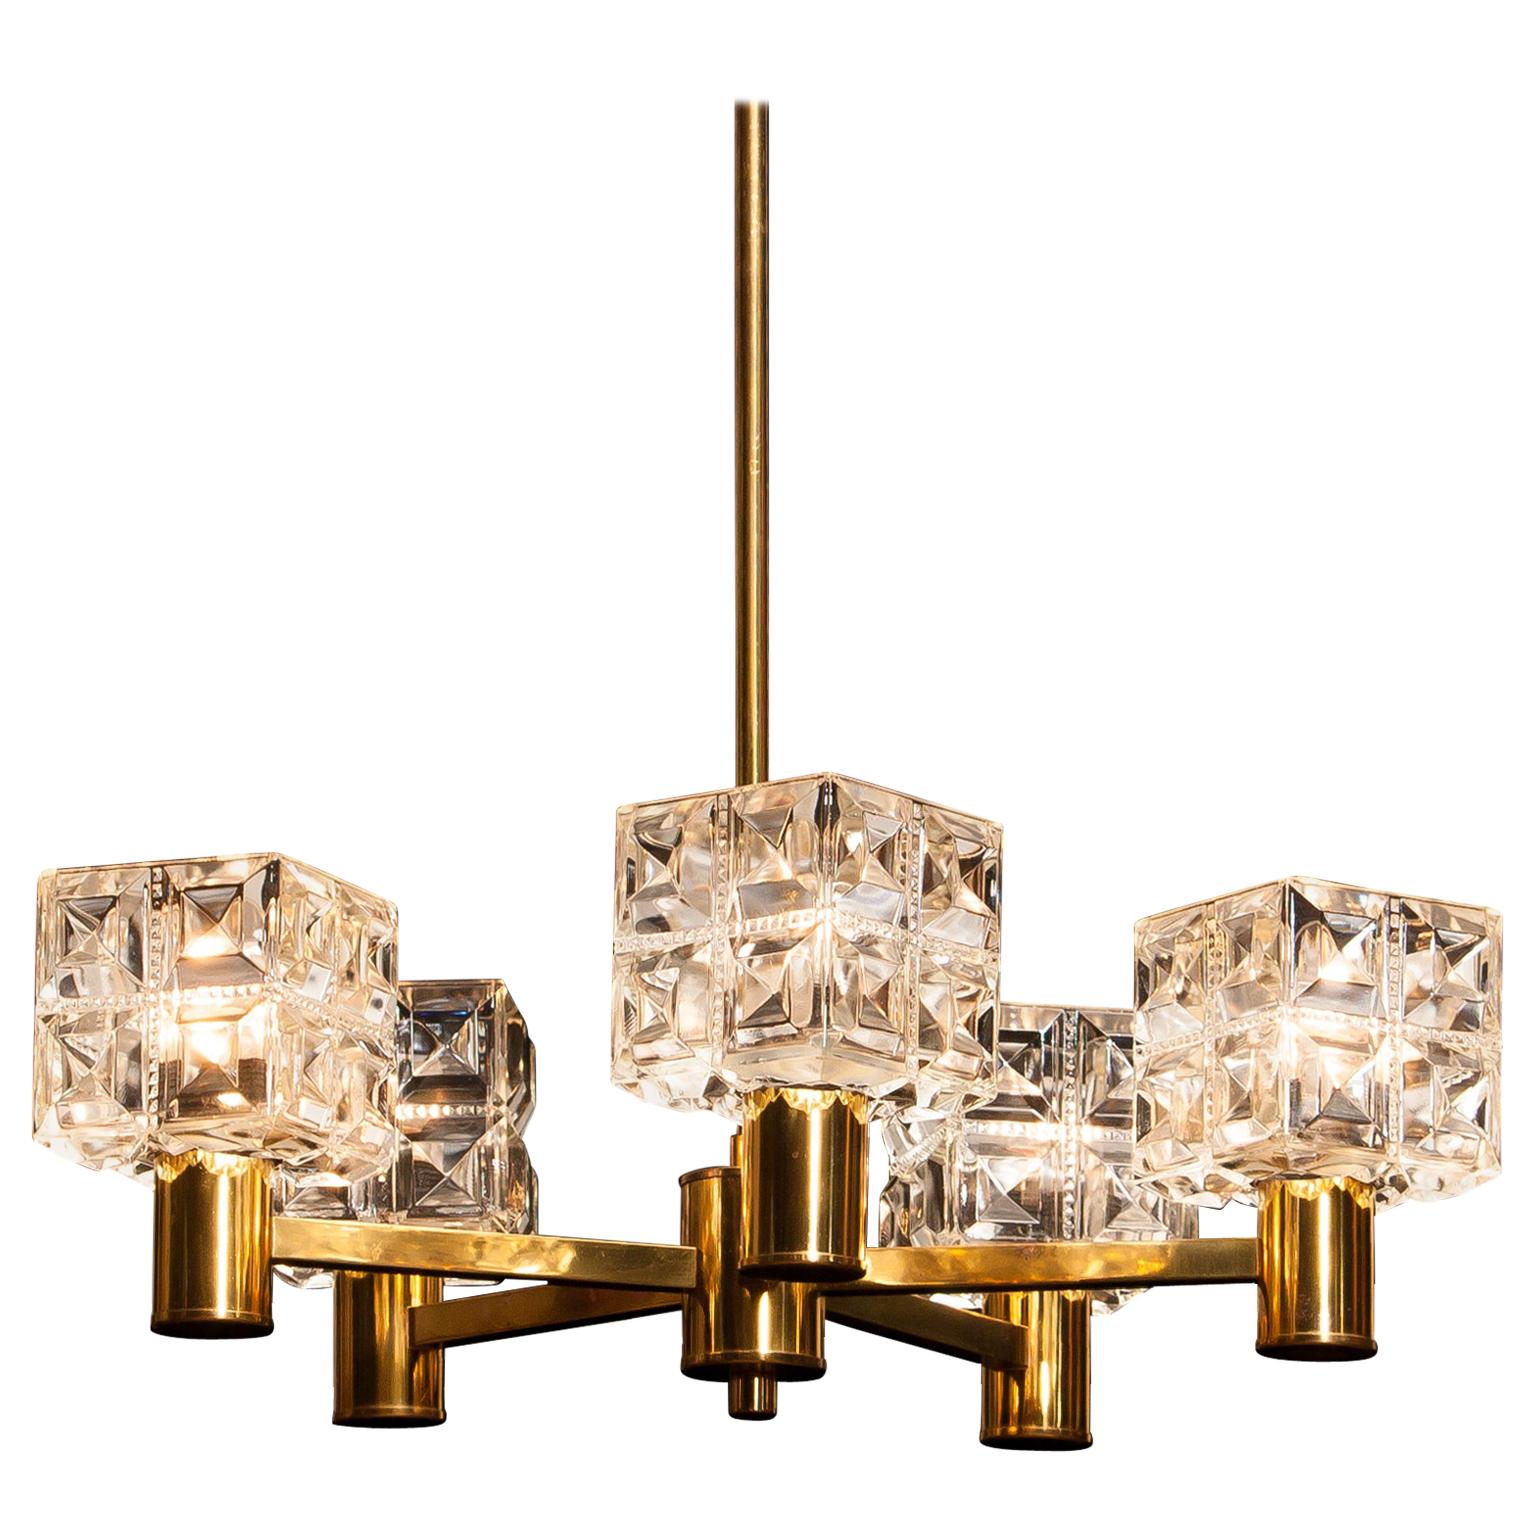 Beautiful chandelier made by Tyringe Konsthantverk, Sweden.
This lamp is made of five-brass arms with crystal shades.
It is in good condition.
Period: 1950s.
Dimensions: H 66 cm, Ø 54 cm.
 